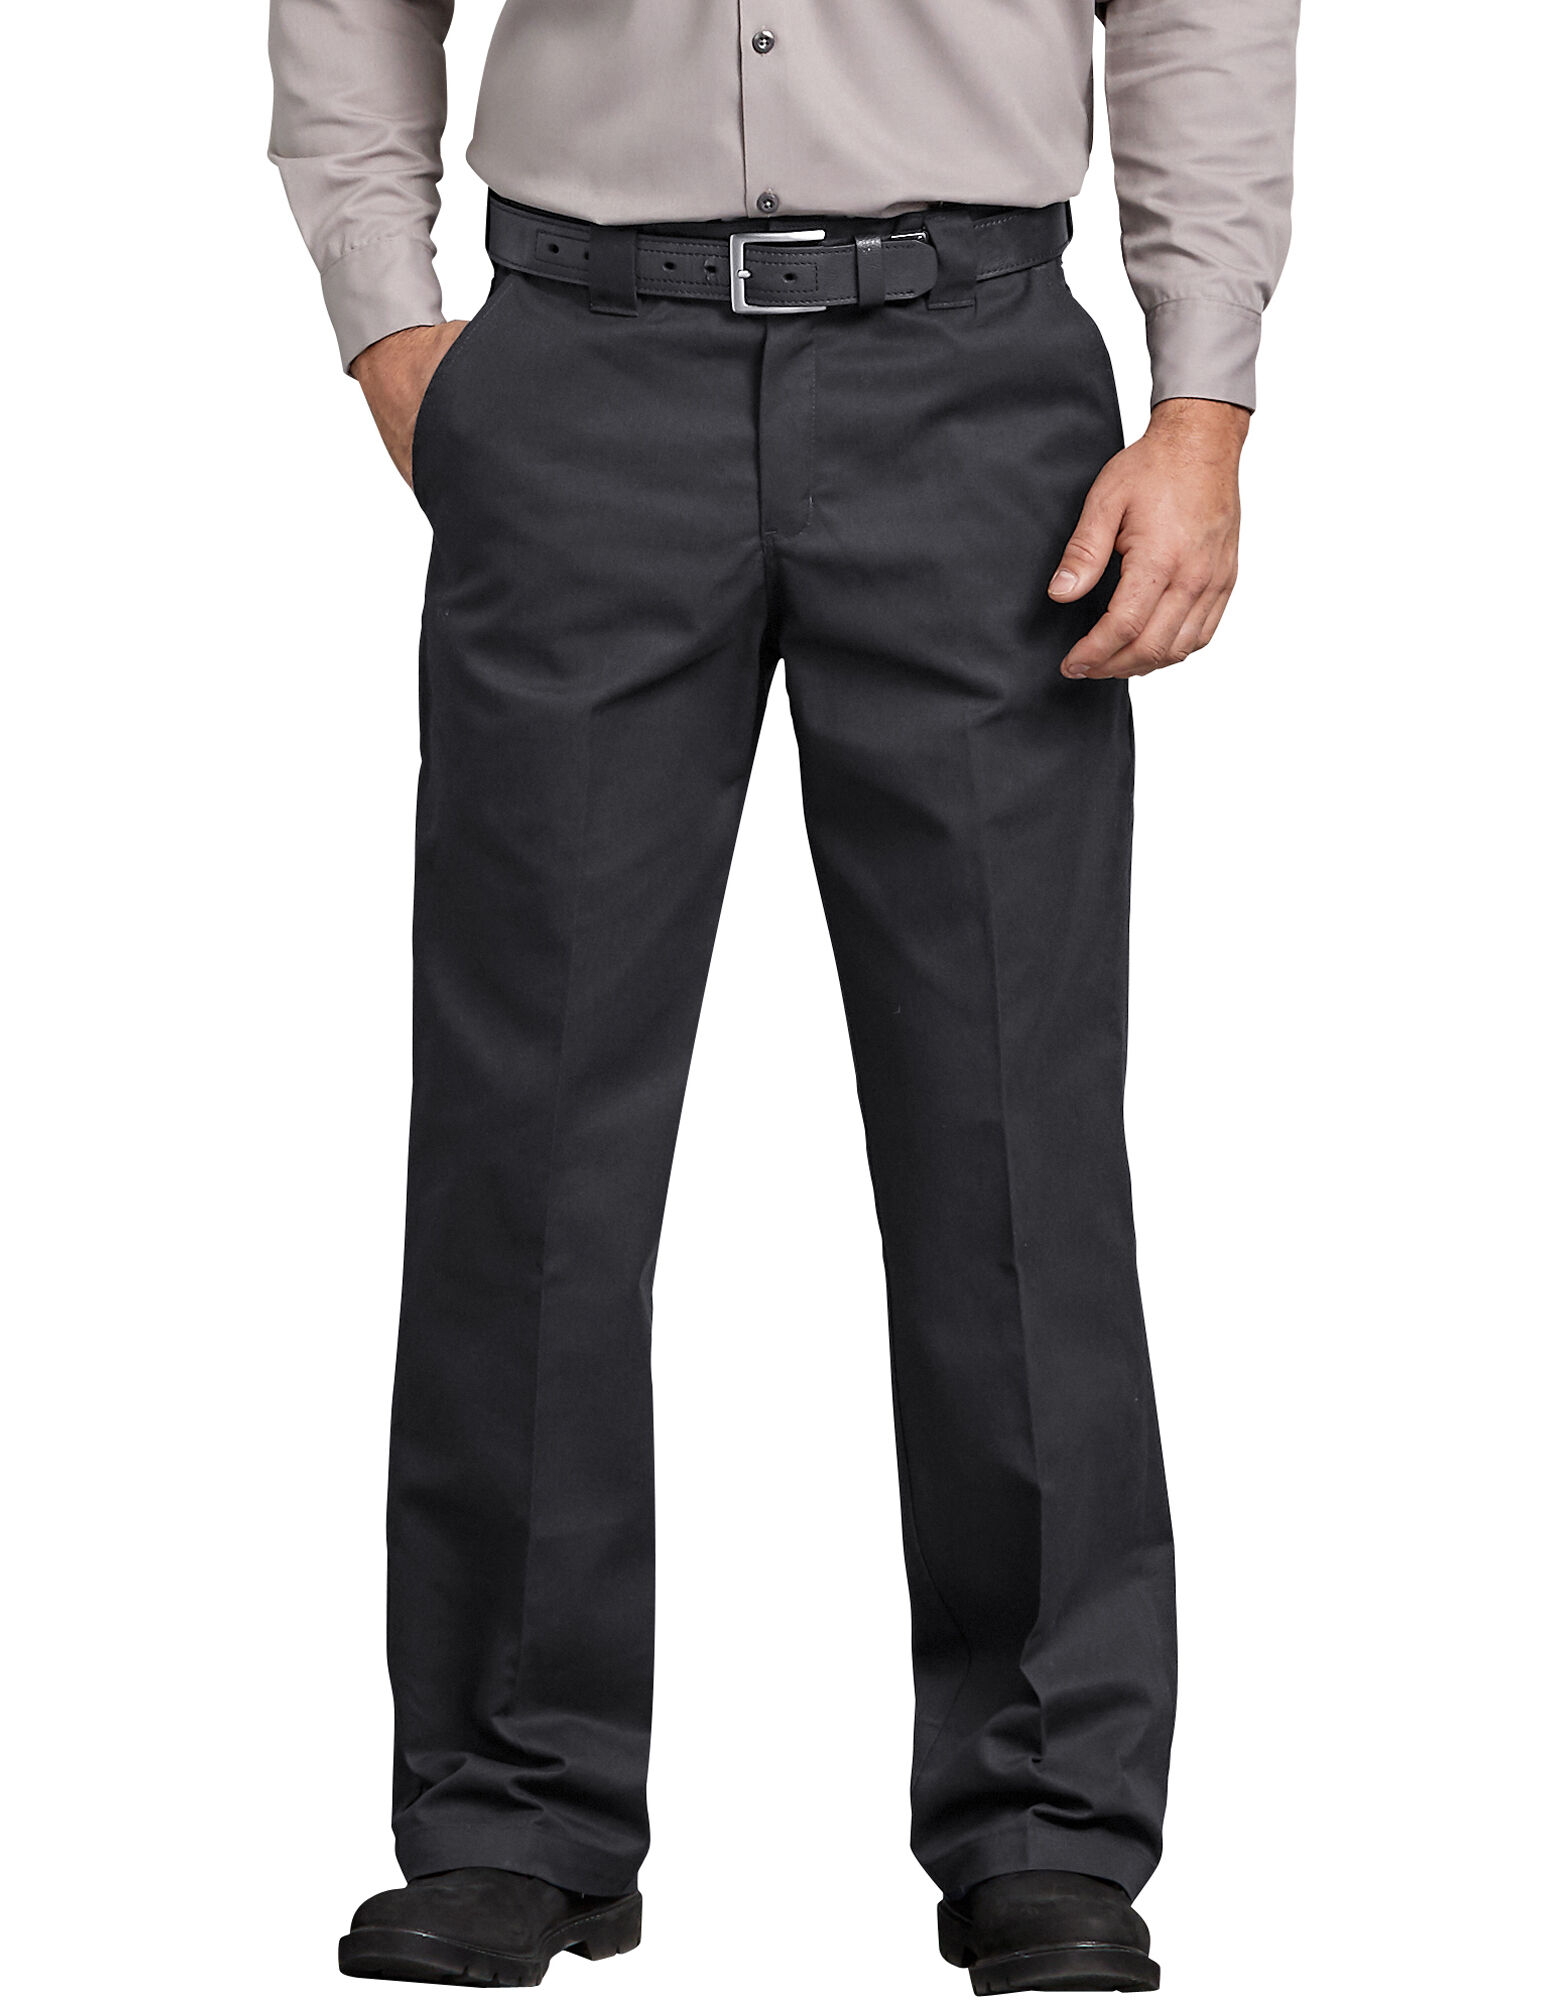 Comfort Waist Pants | Relaxed Fit Twill 